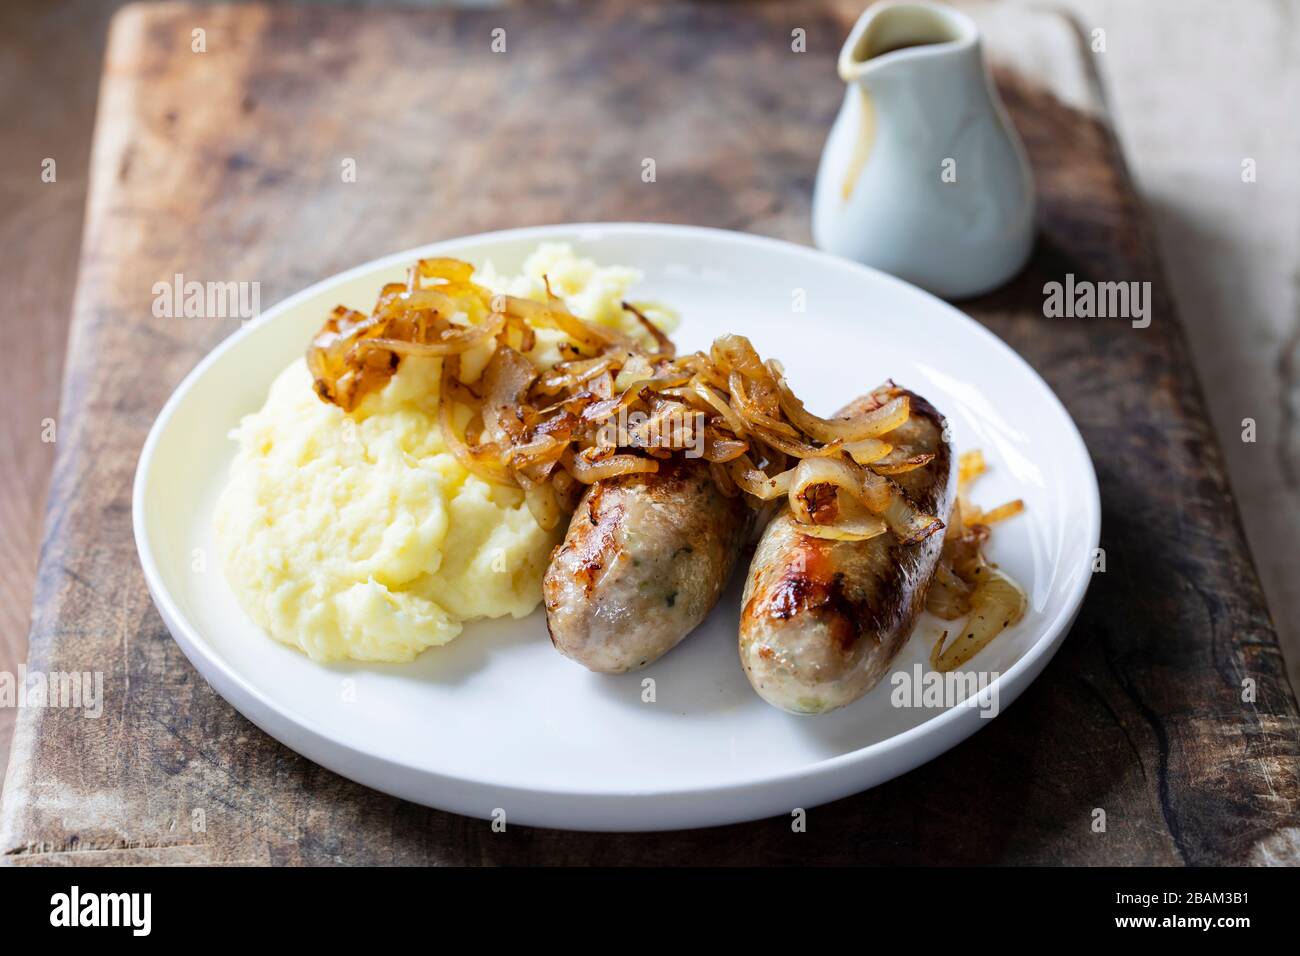 Sausages with fried onions and mashed potatoes Stock Photo